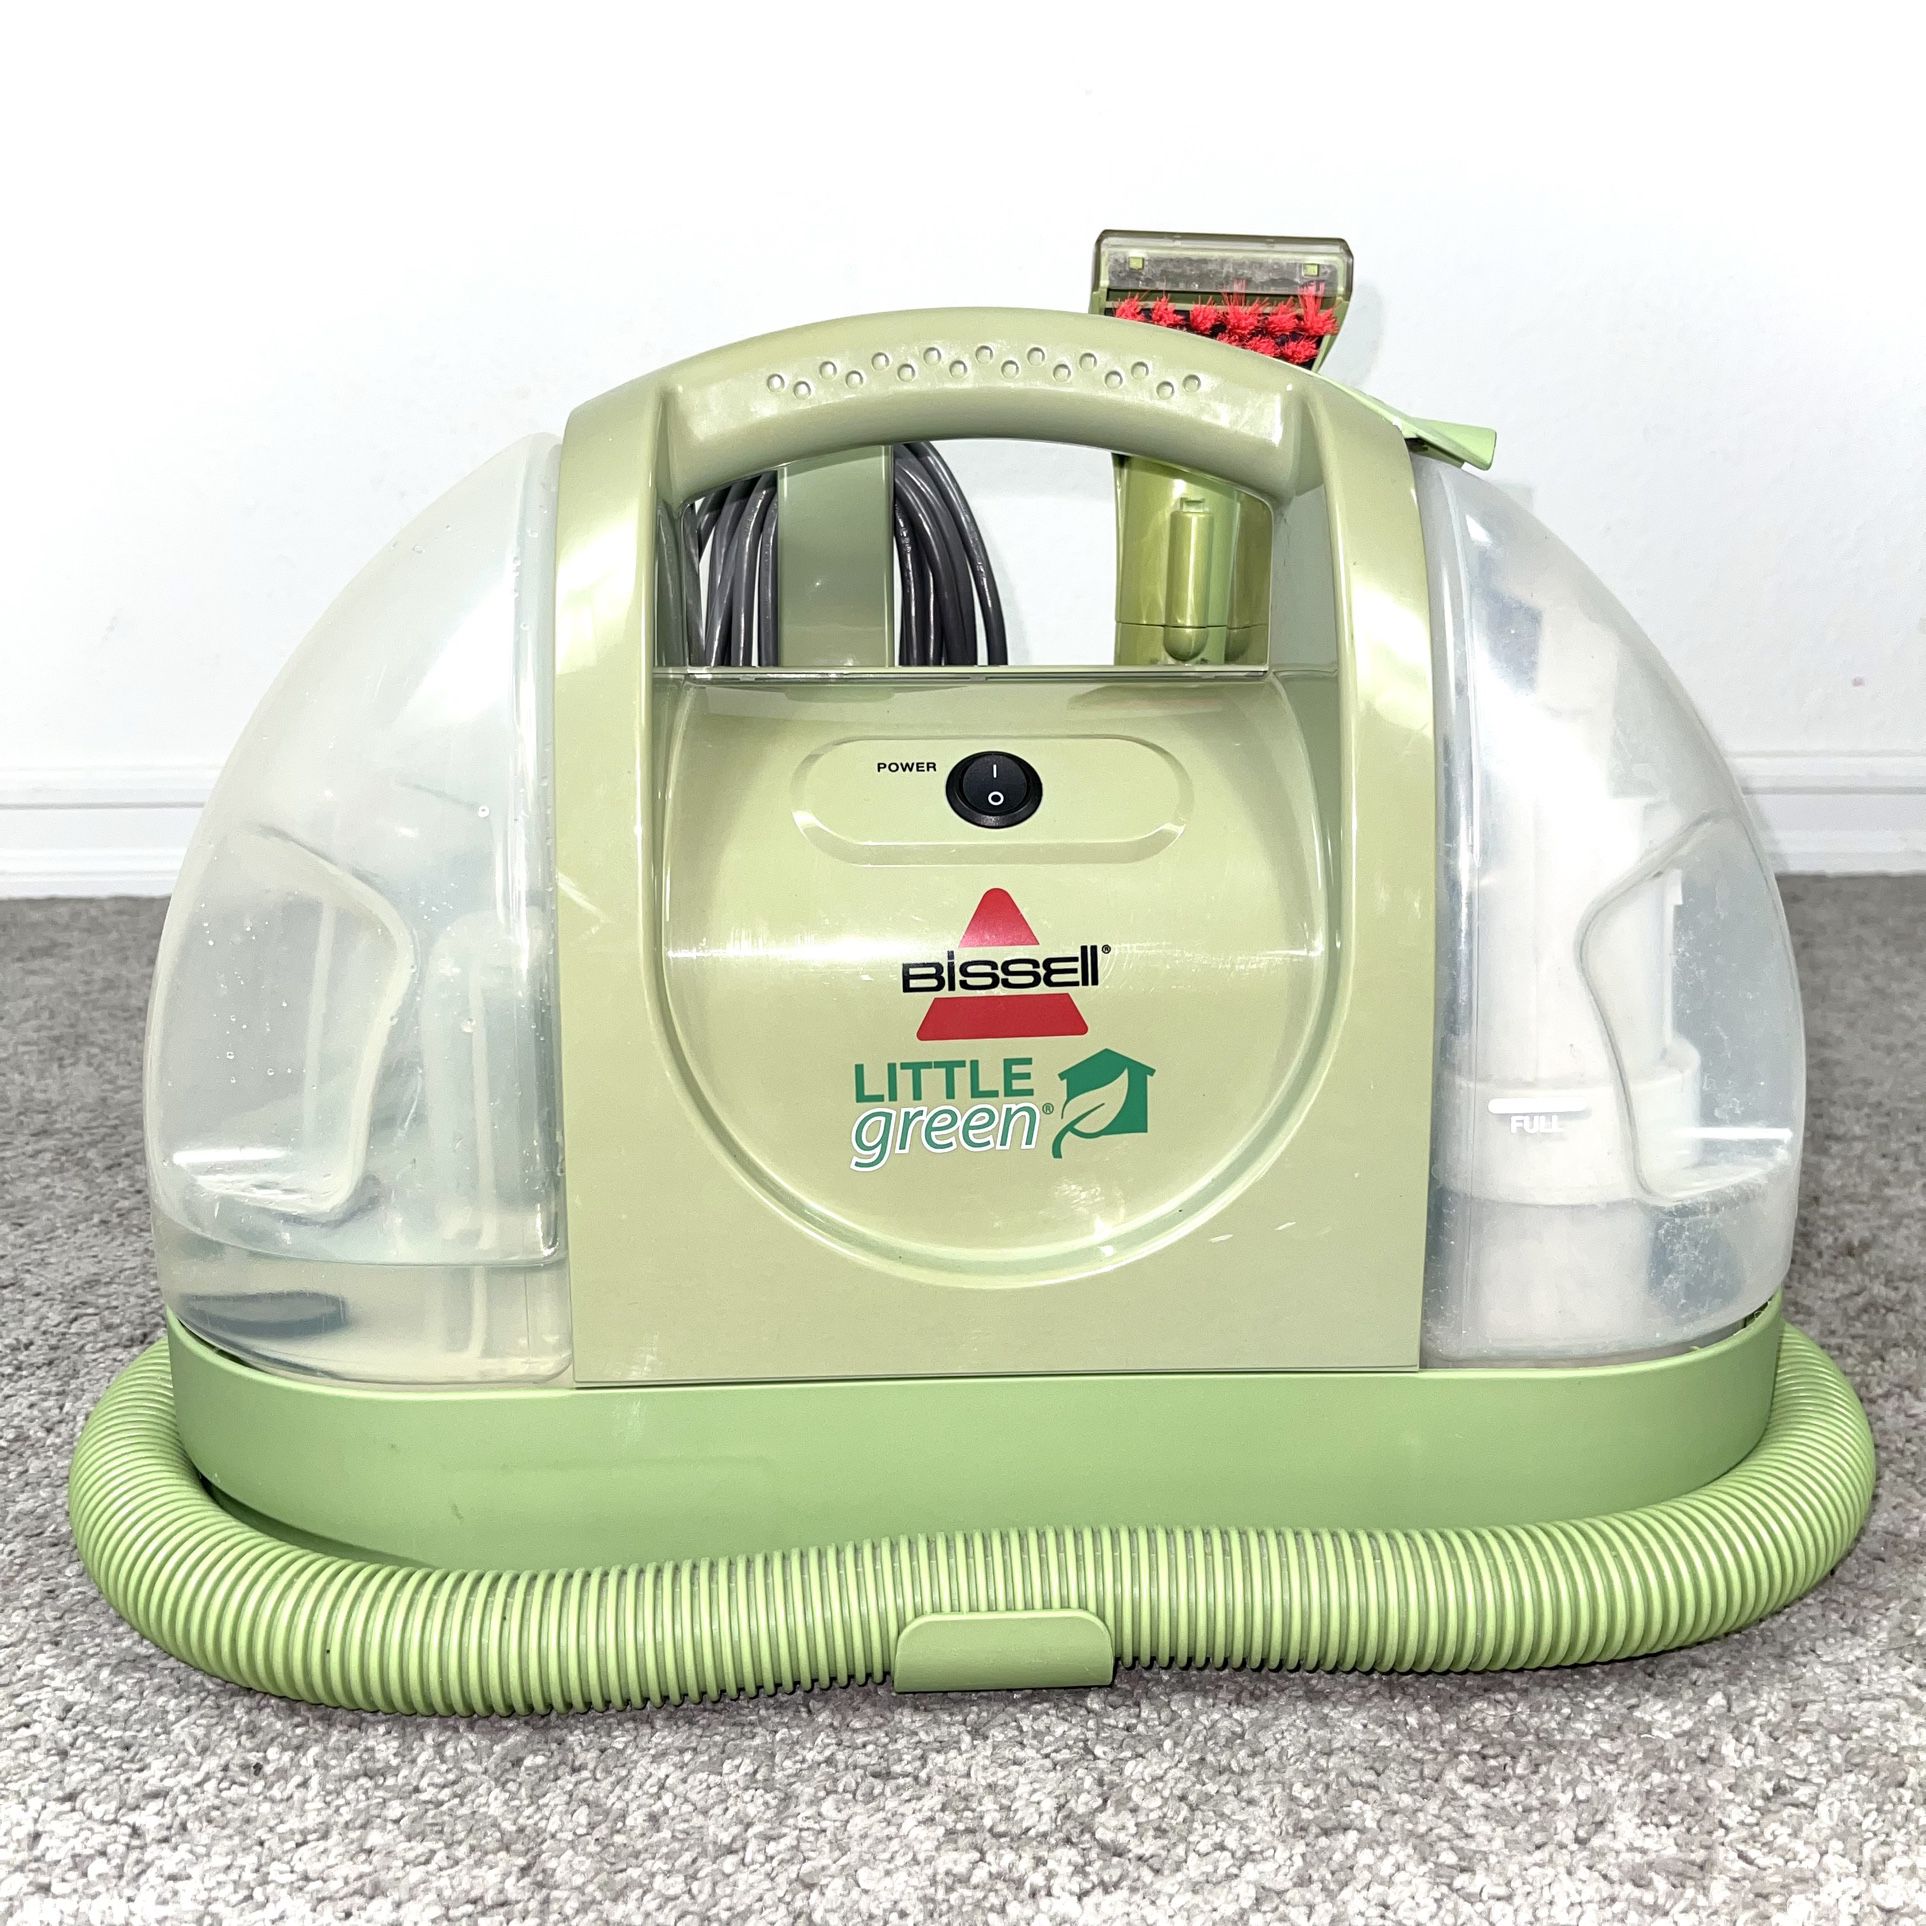 Bissell Little Green Portable Carpet Cleaner - Vacuum 